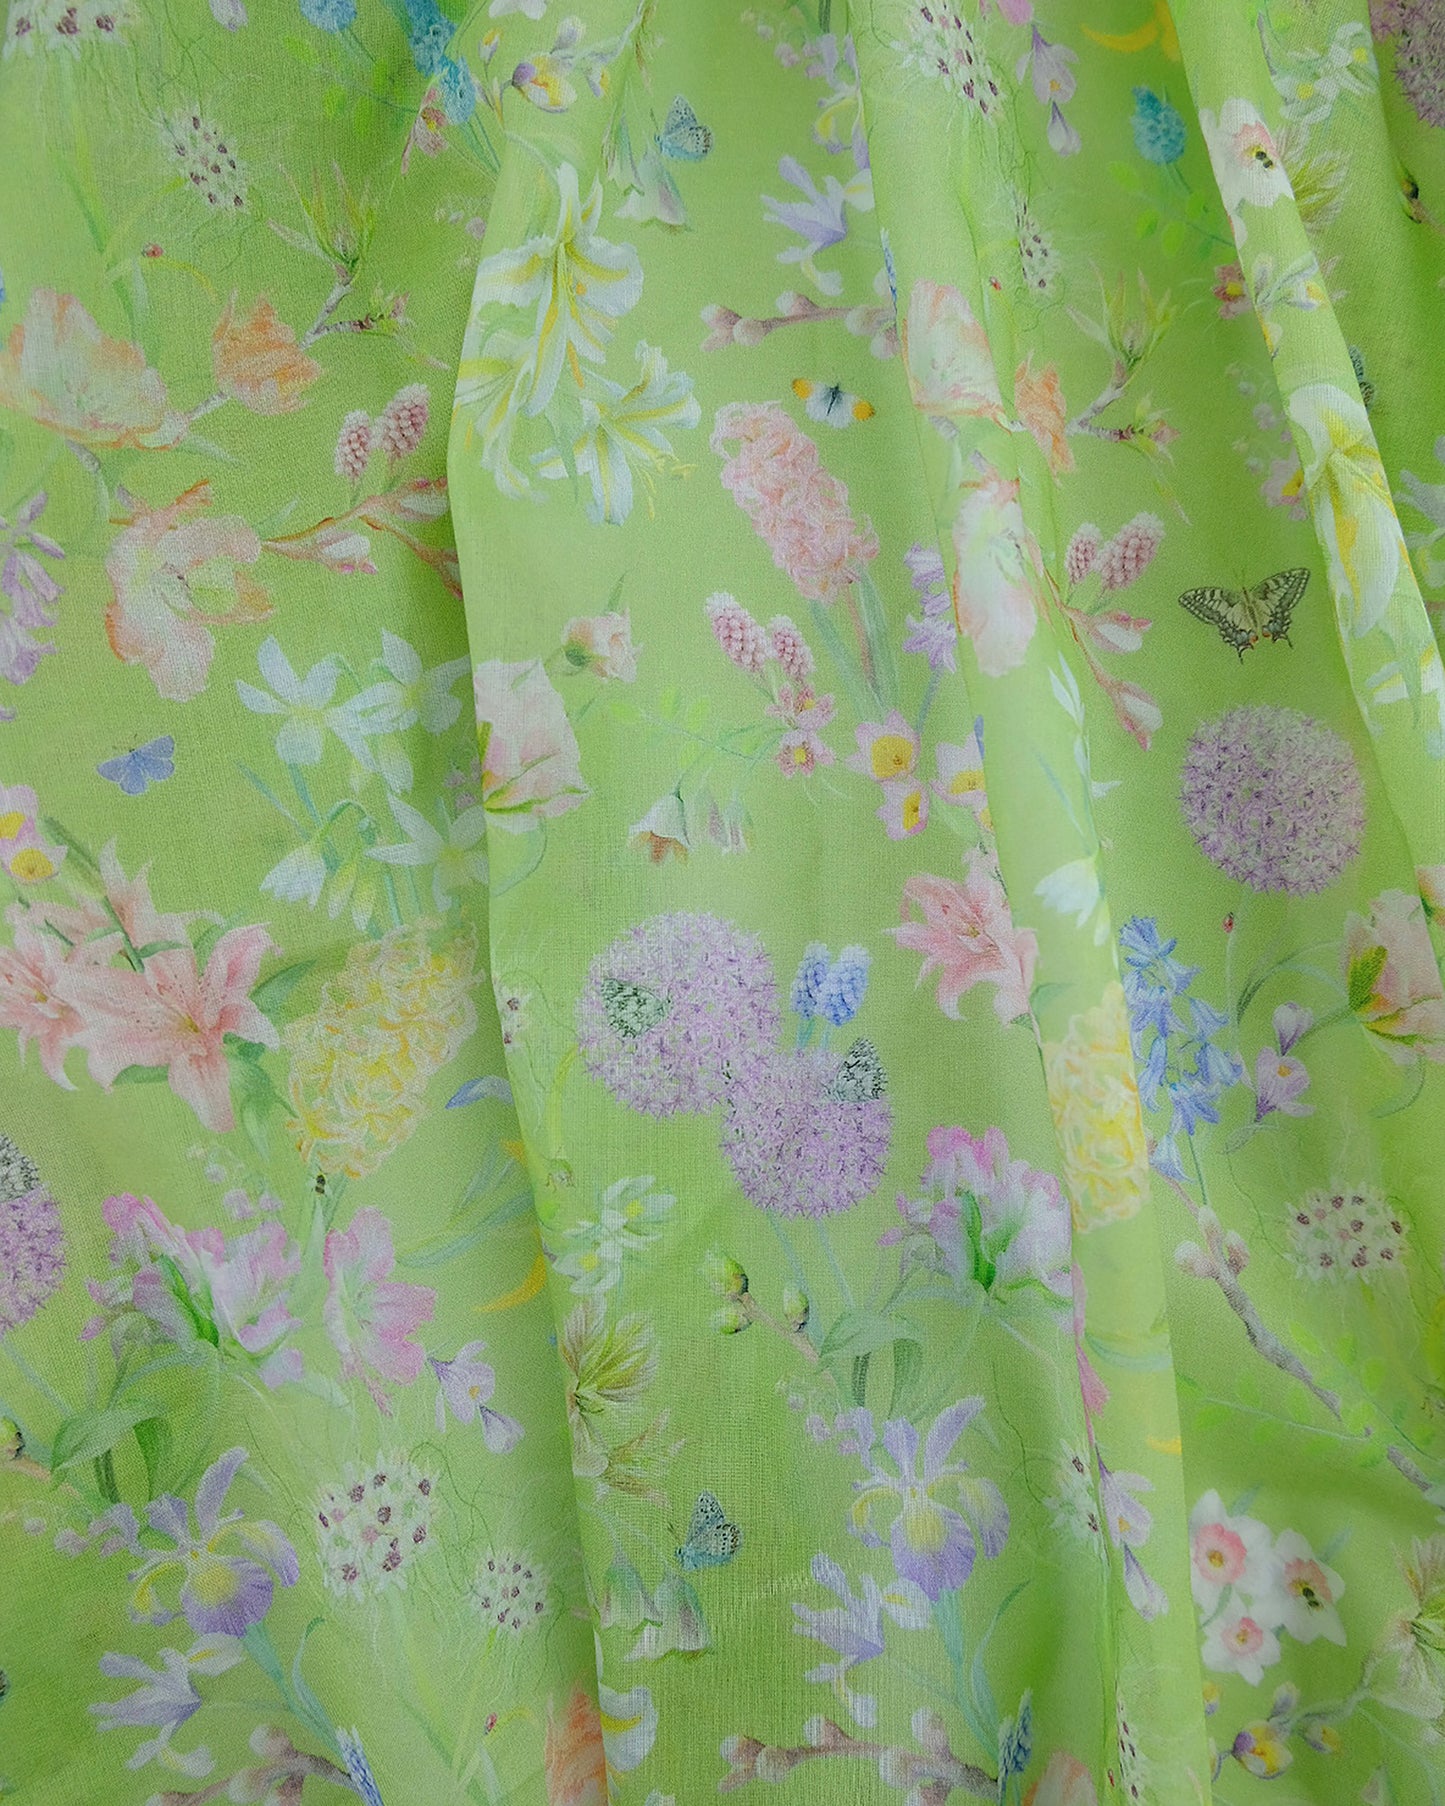 Lightweight sustainable drapery in a spring flowered ‘optimism renewed’ green for curtains and voile furnishings.